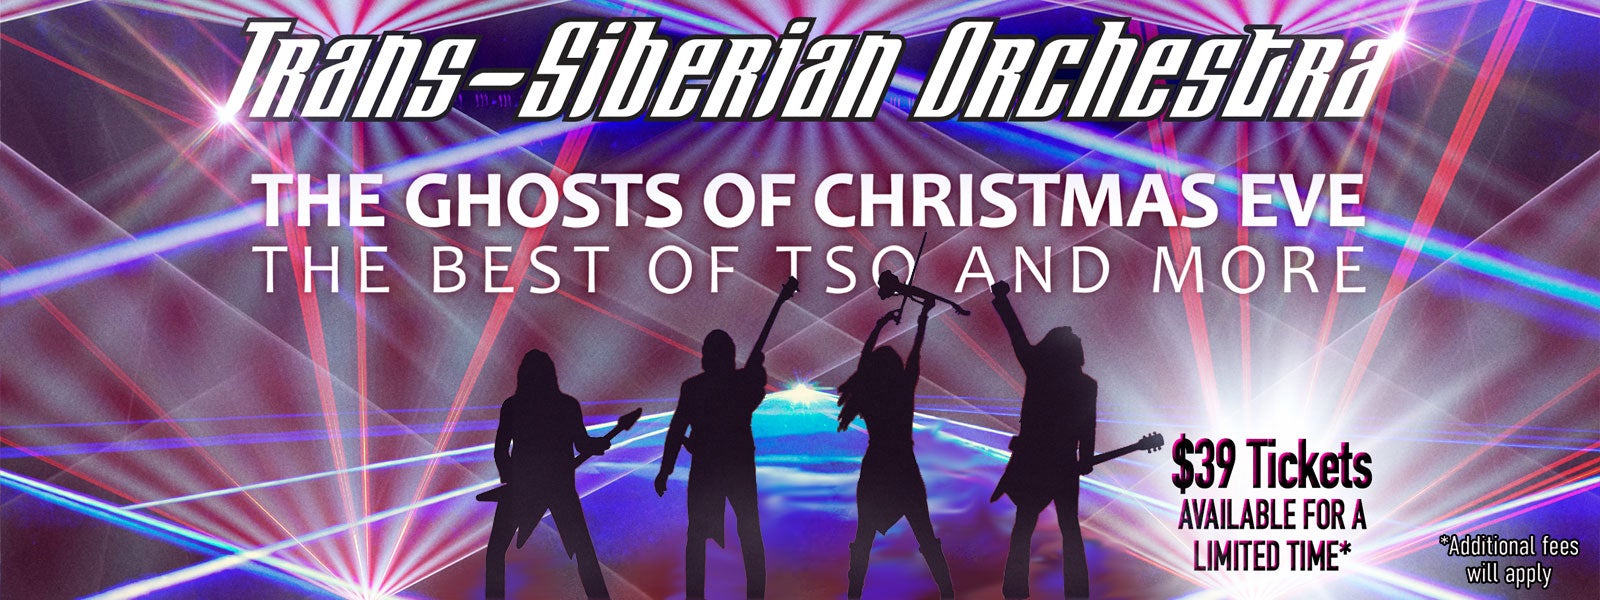 More Info for Trans-Siberian Orchestra: Ghosts of Christmas Eve